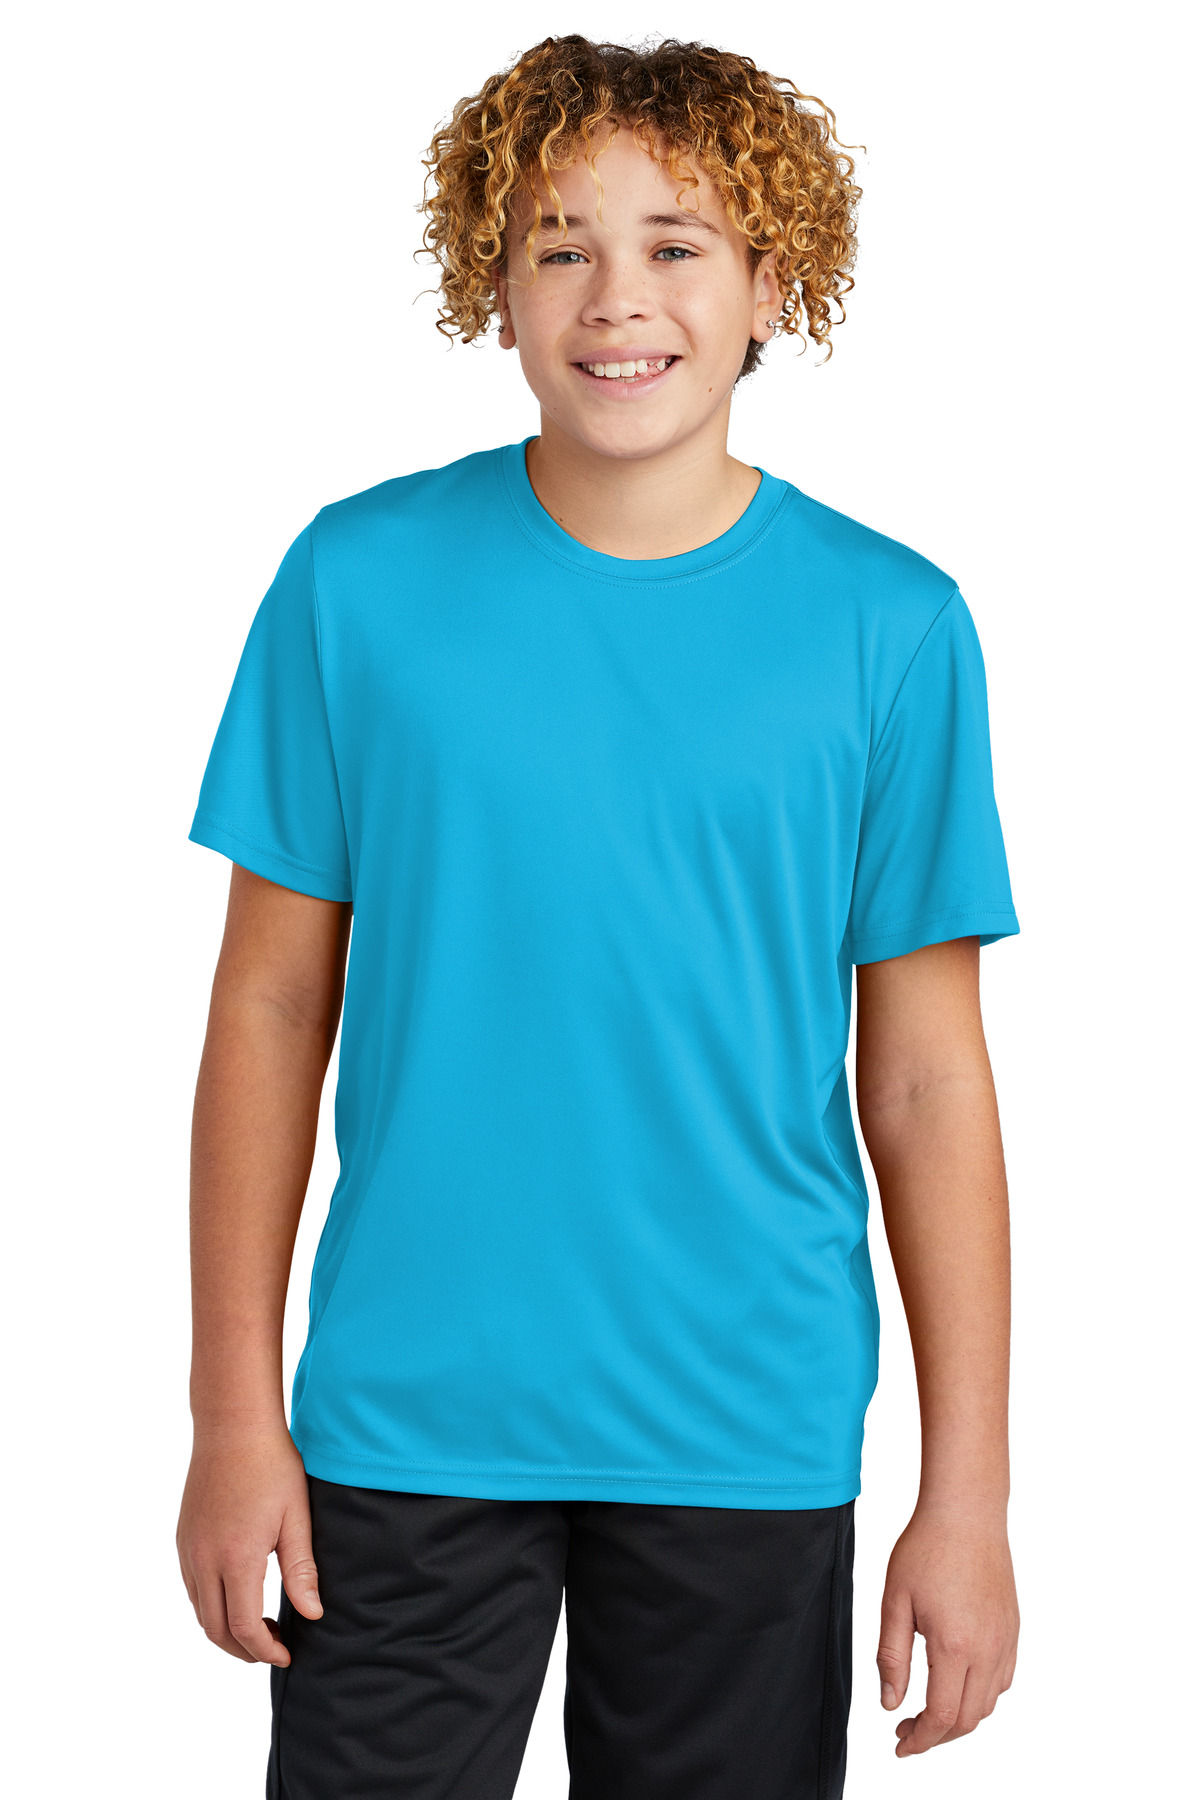 Sport-Tek Youth PosiCharge Re-Compete T-Shirt YST720